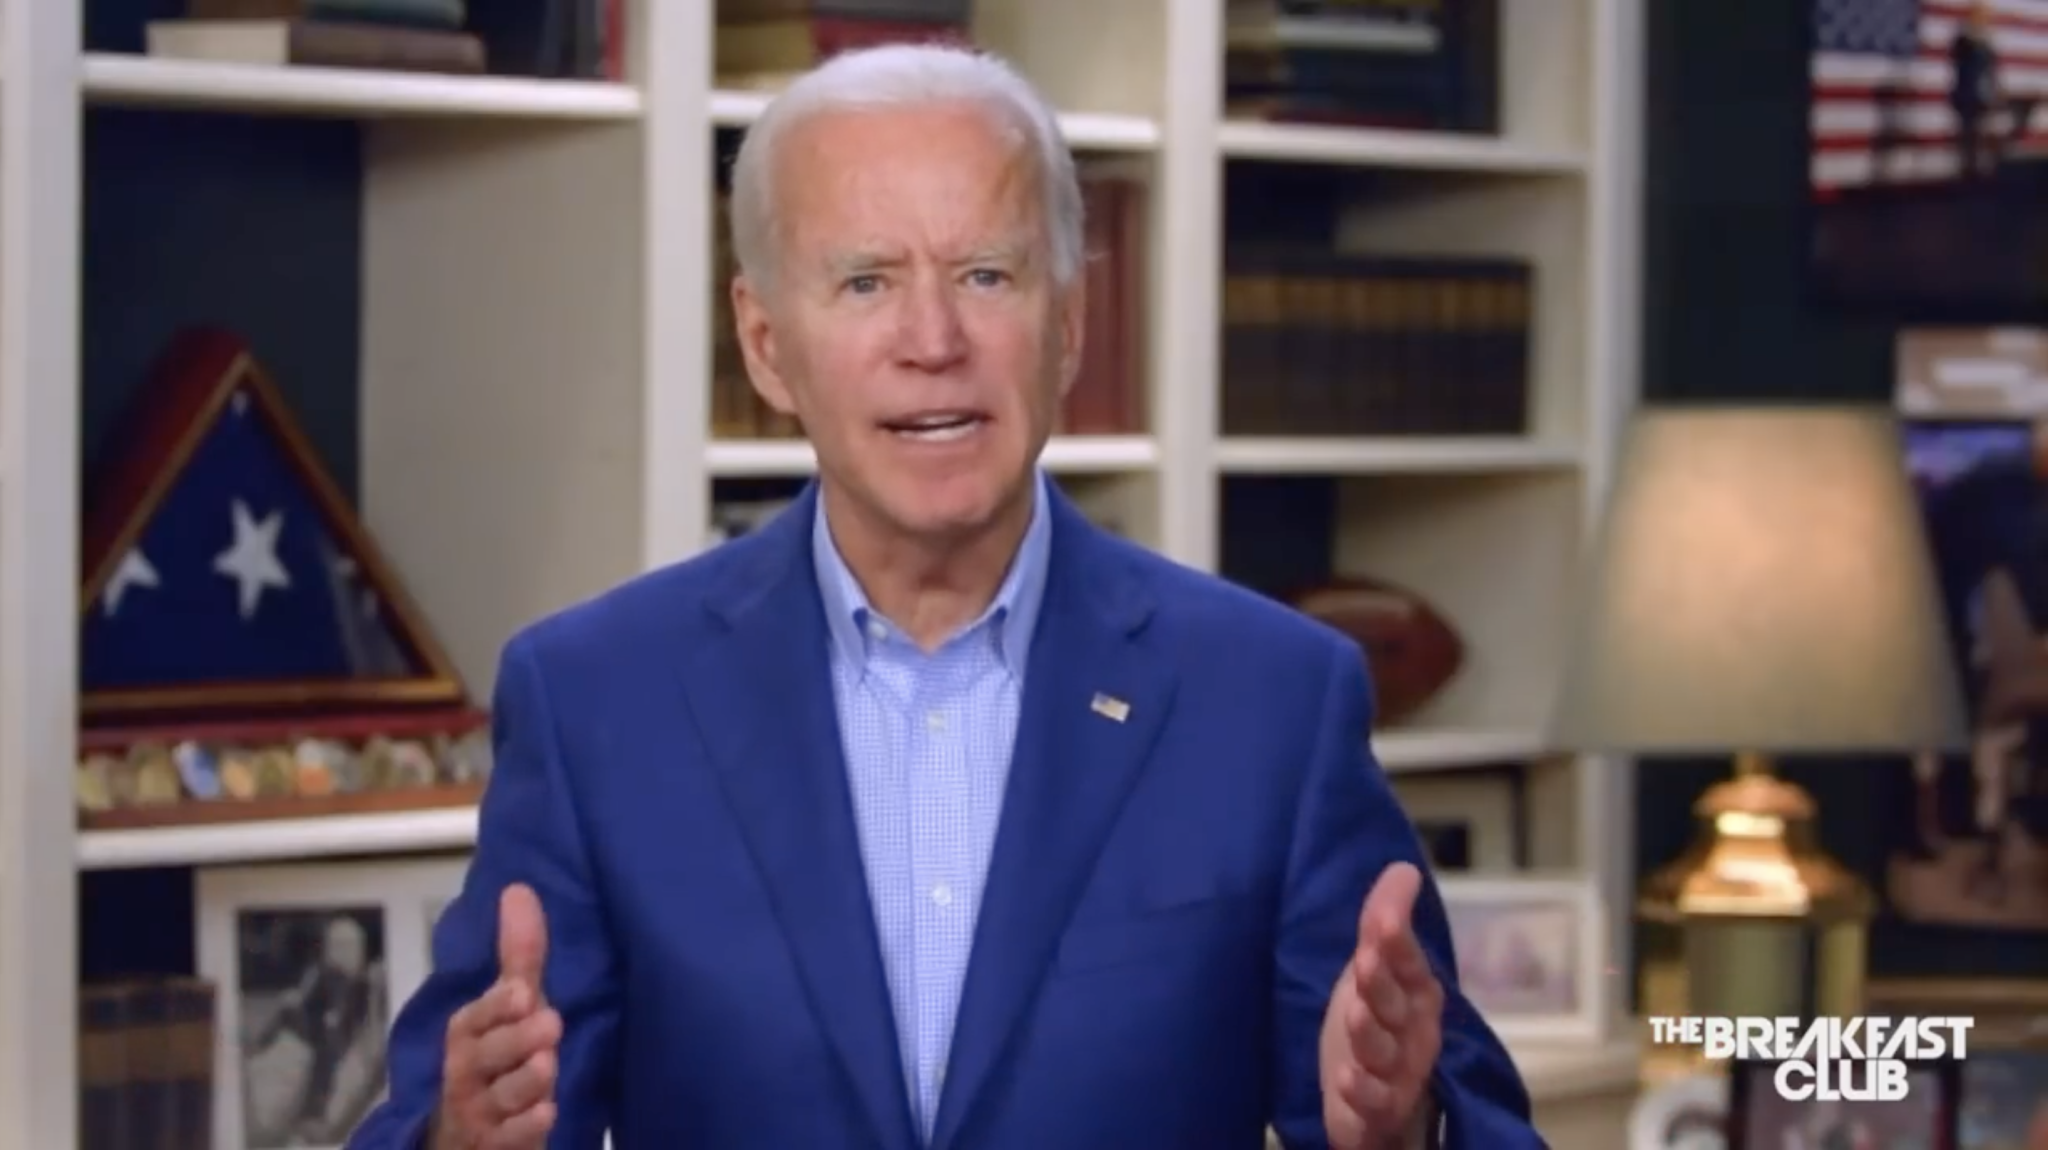 Joe Biden Tells Unsure Black Voters 'You Ain't Black' If They Don't Support Him